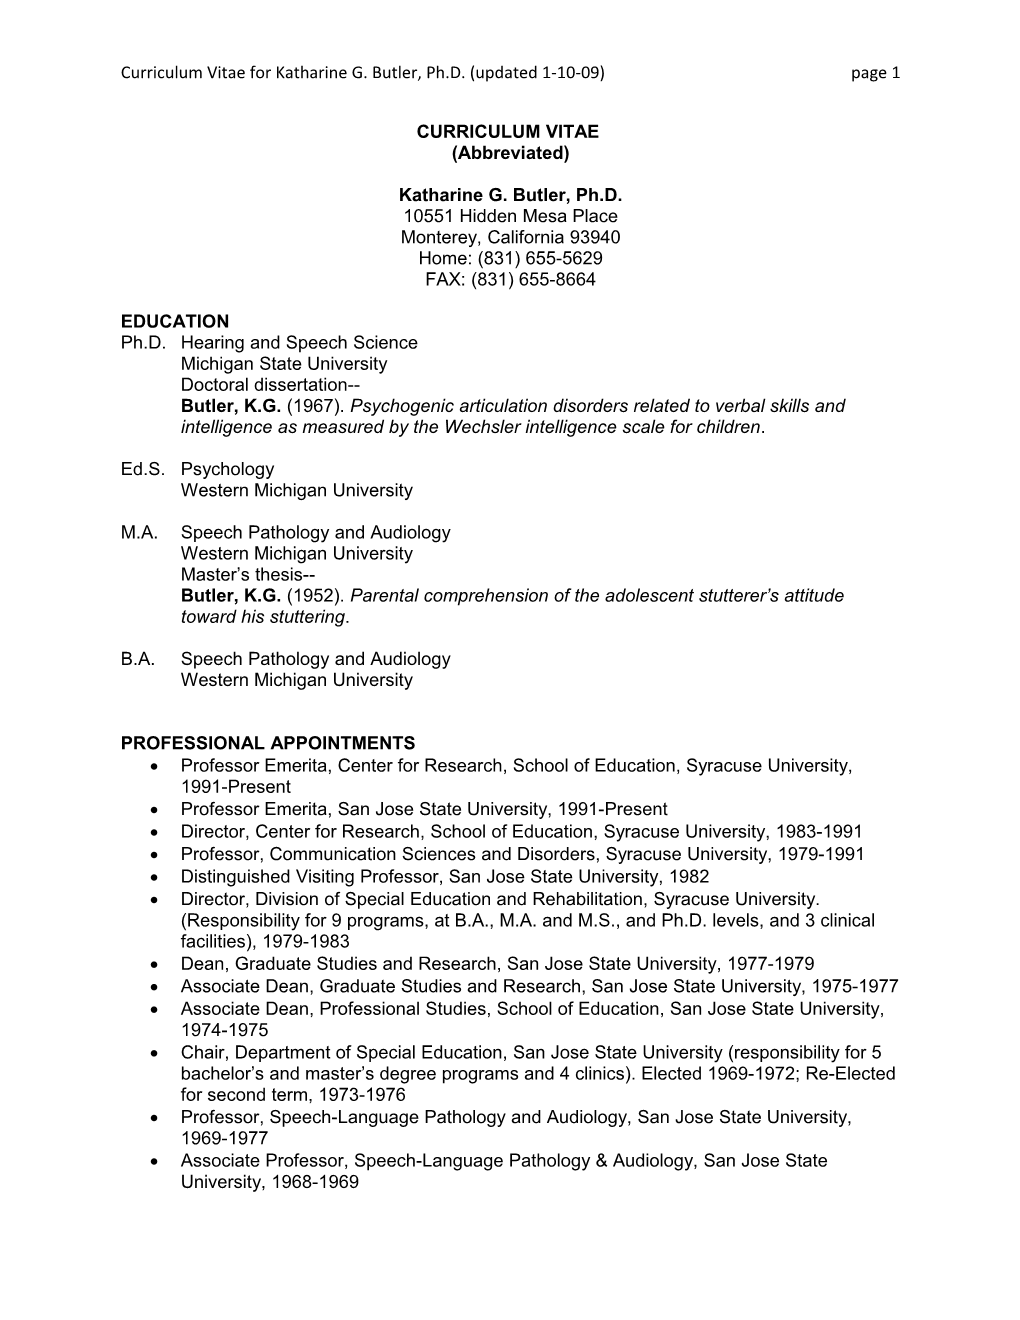 Curriculum Vitae for Katharine G. Butler, Ph.D. (Updated 1-10-09) Page 1